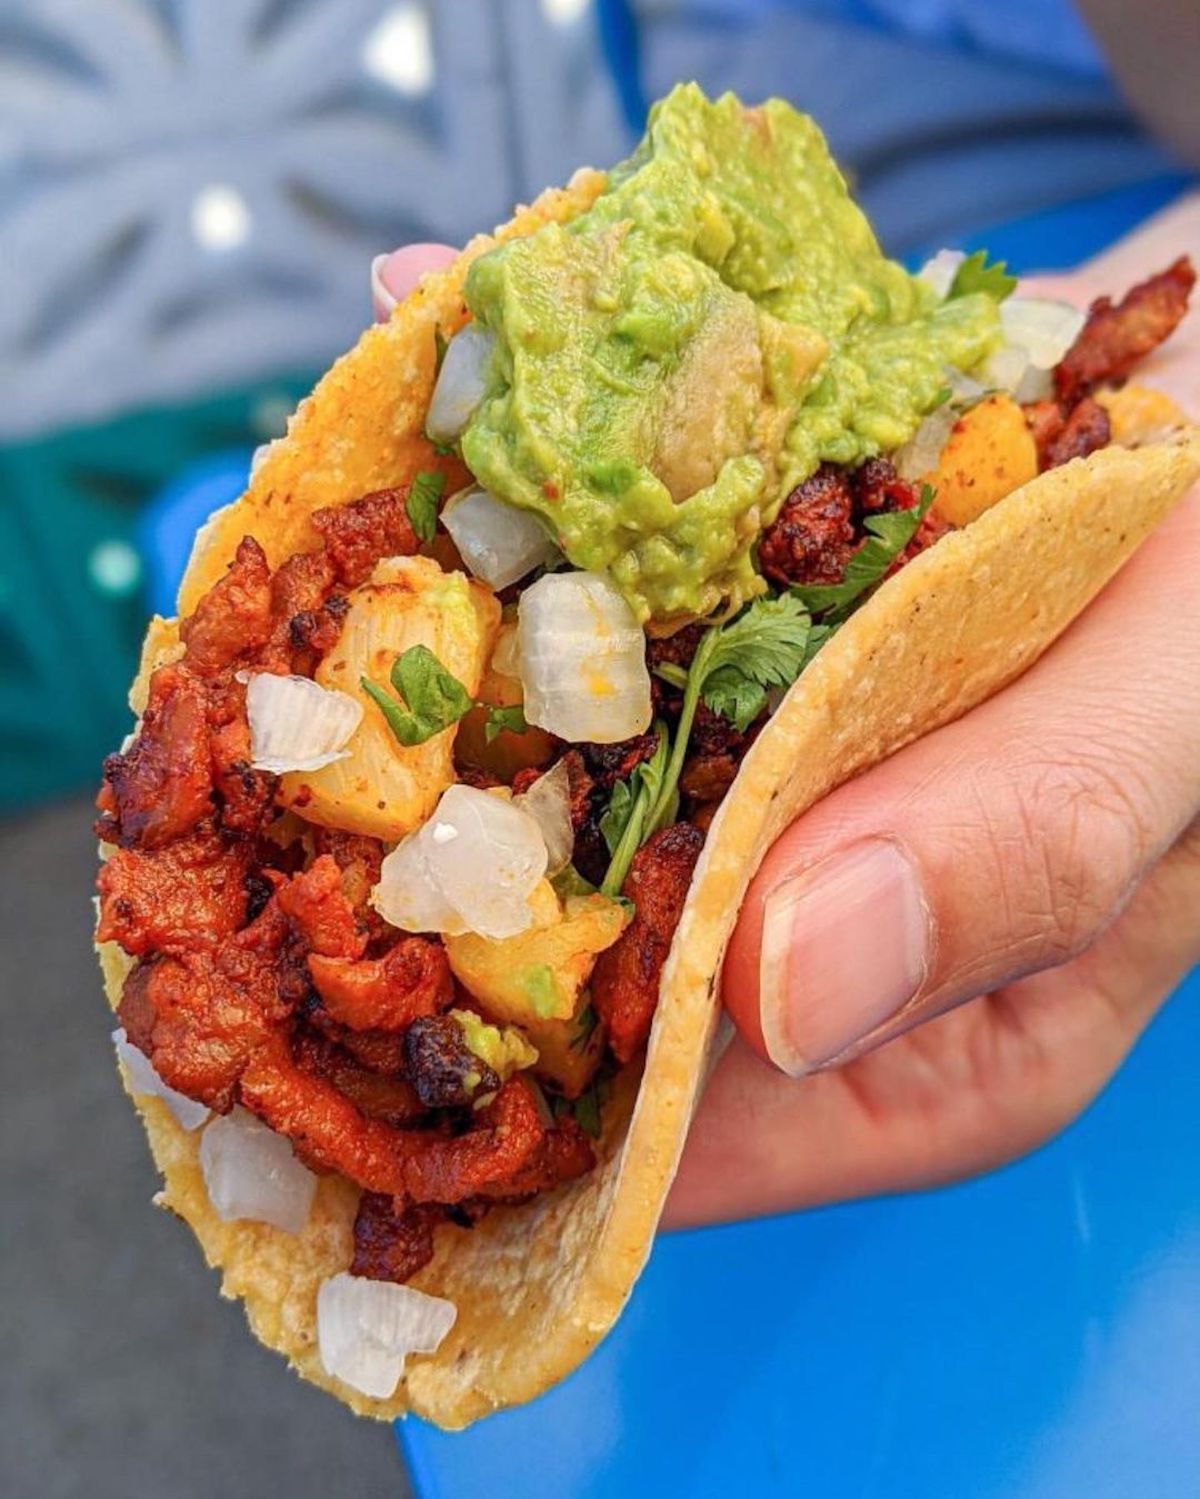 Seaport Village to Welcome Crack Taco Shop’s Second Store